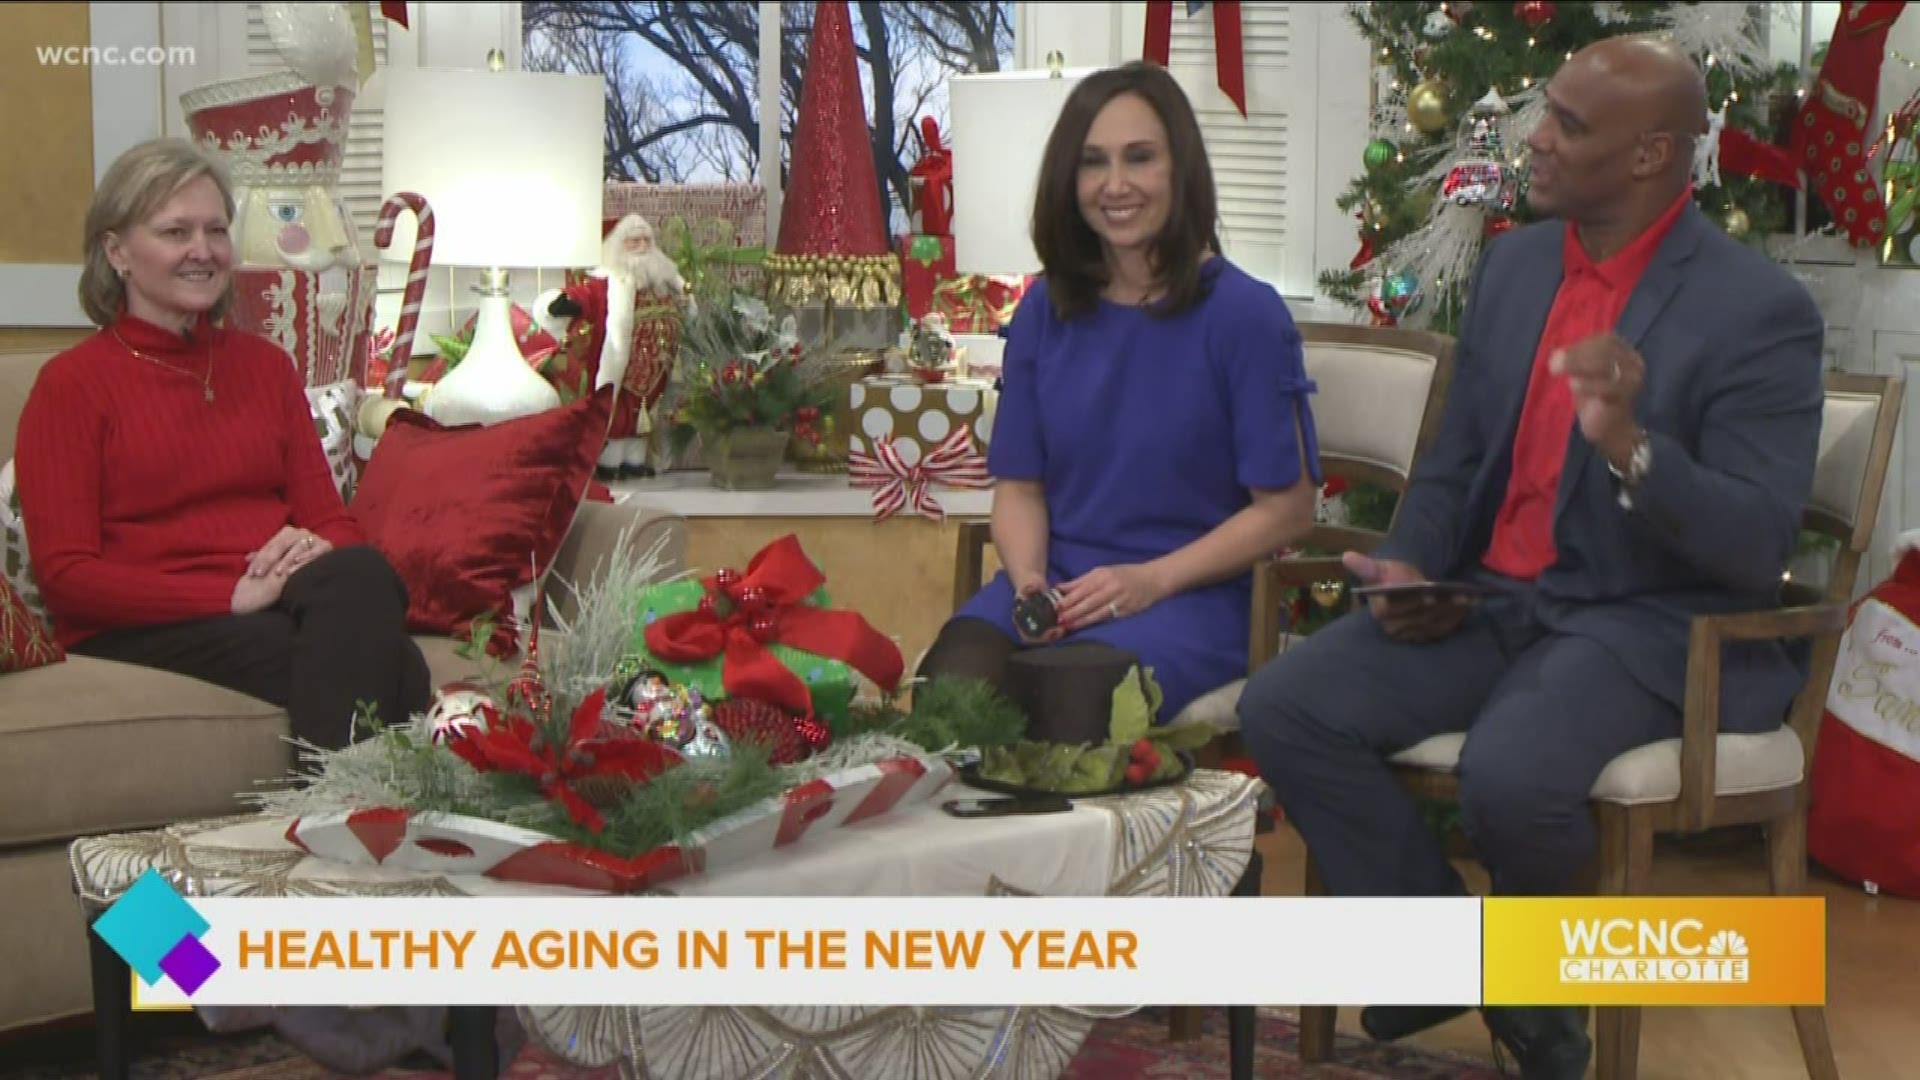 Health care advocate Teresa Parker shares how to stay happy and healthy while aging.